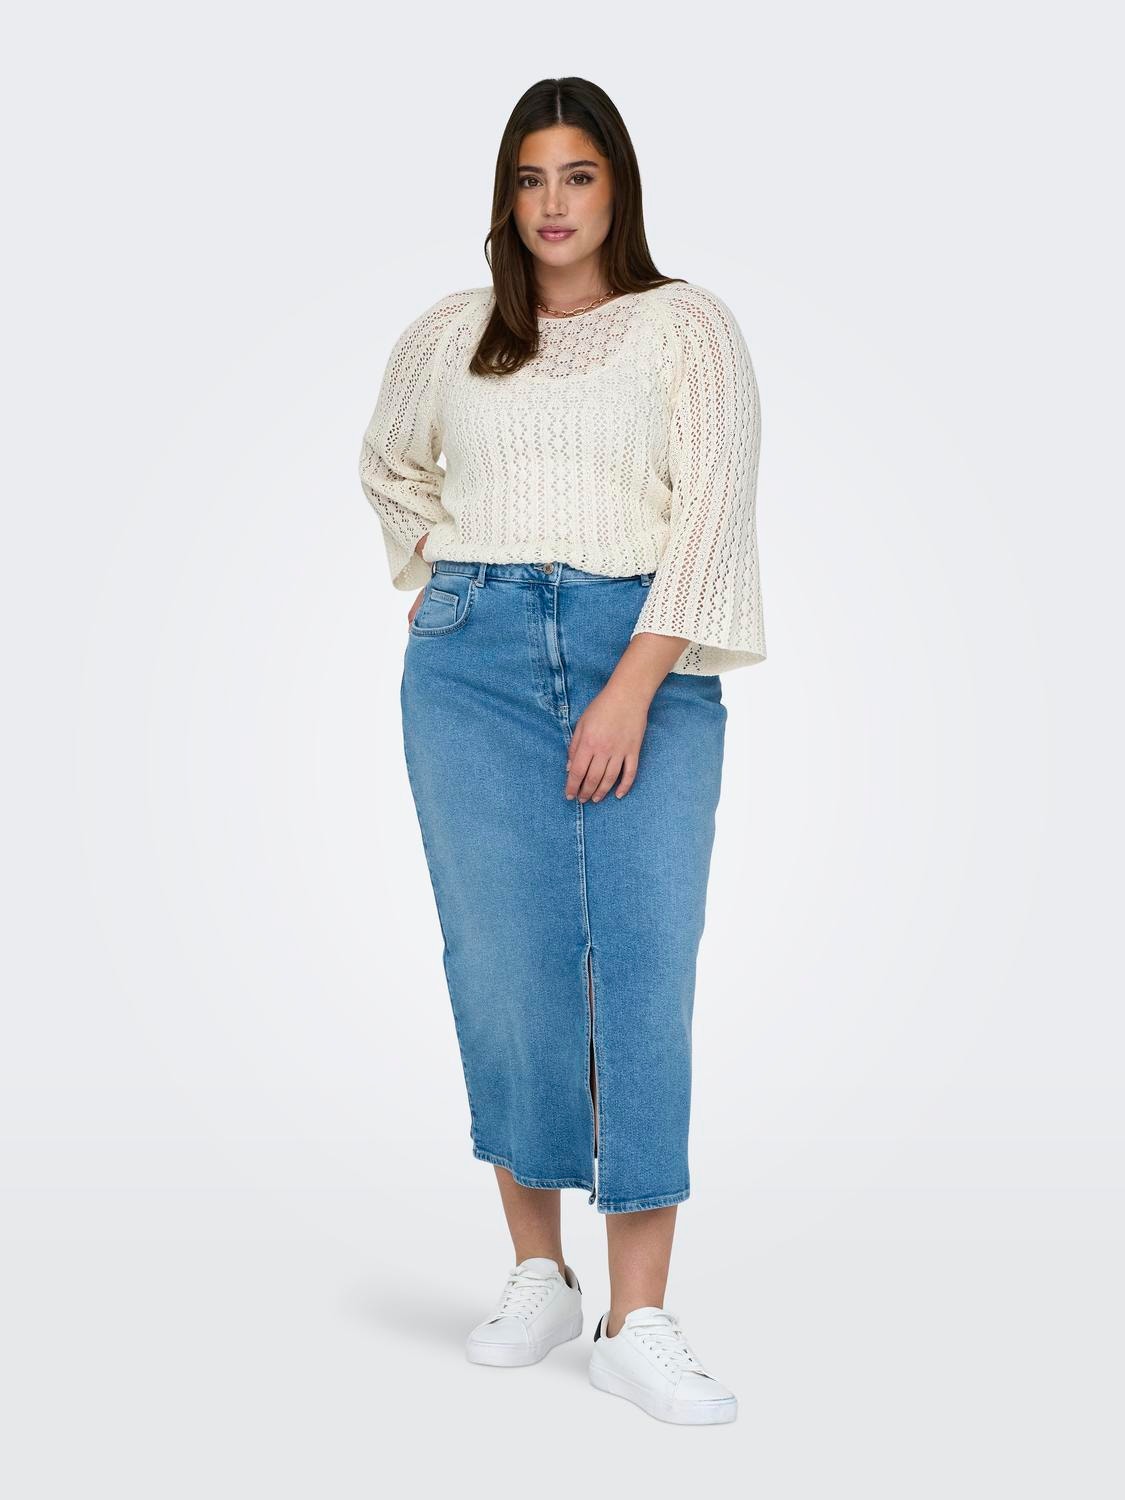 ONLY Curvy o-neck knitted pullover -Cloud Dancer - 15323302